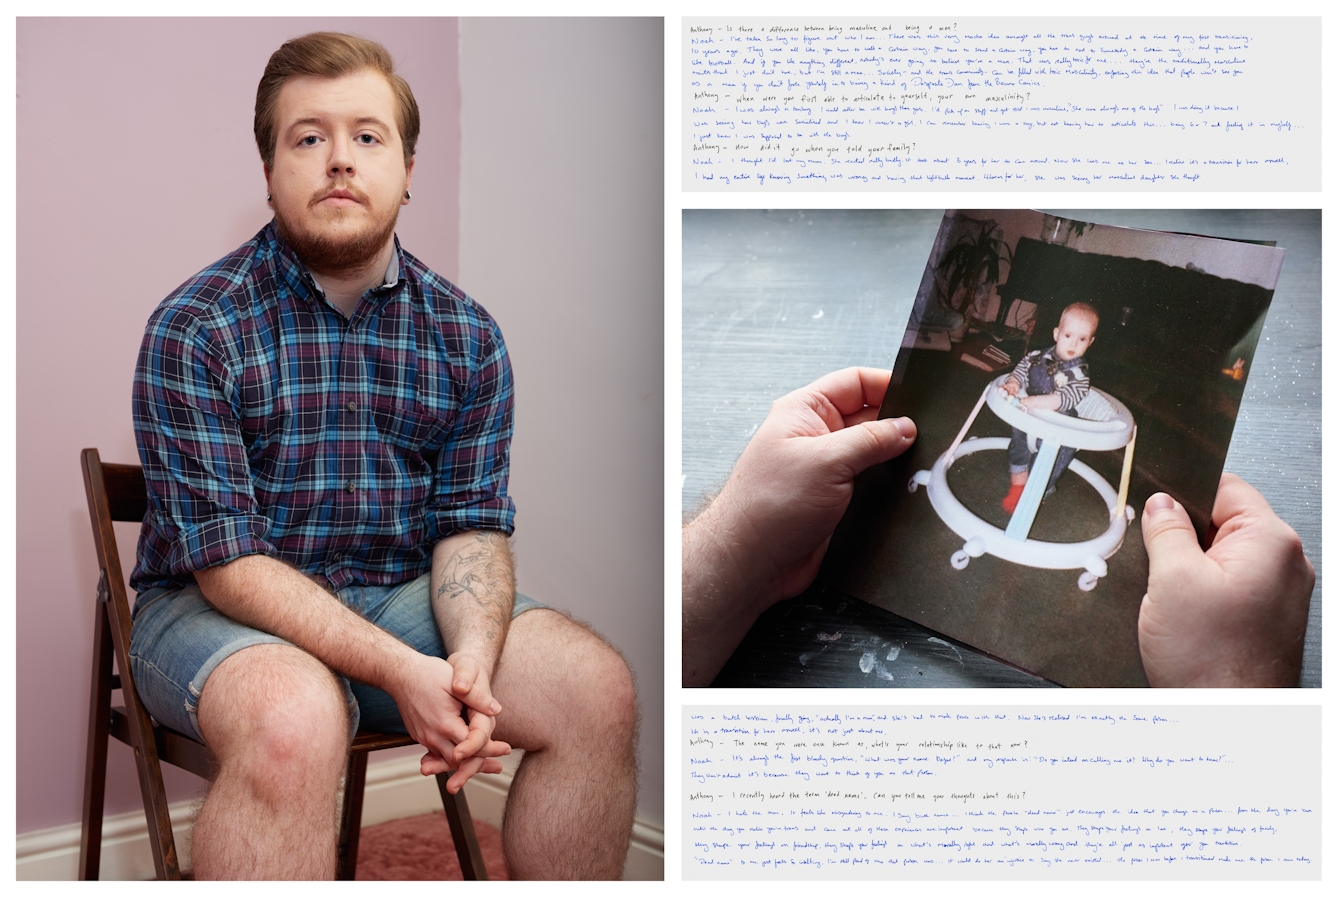 Photograph of an individual sat on a chair in the corner of a room. They are looking straight to camera and behind them one of the walls is pink in colour. To the right of this photograph is another photograph showing two hands holding a family photo of a toddler in a baby walker. Above and below this image are images of handwritten texts.